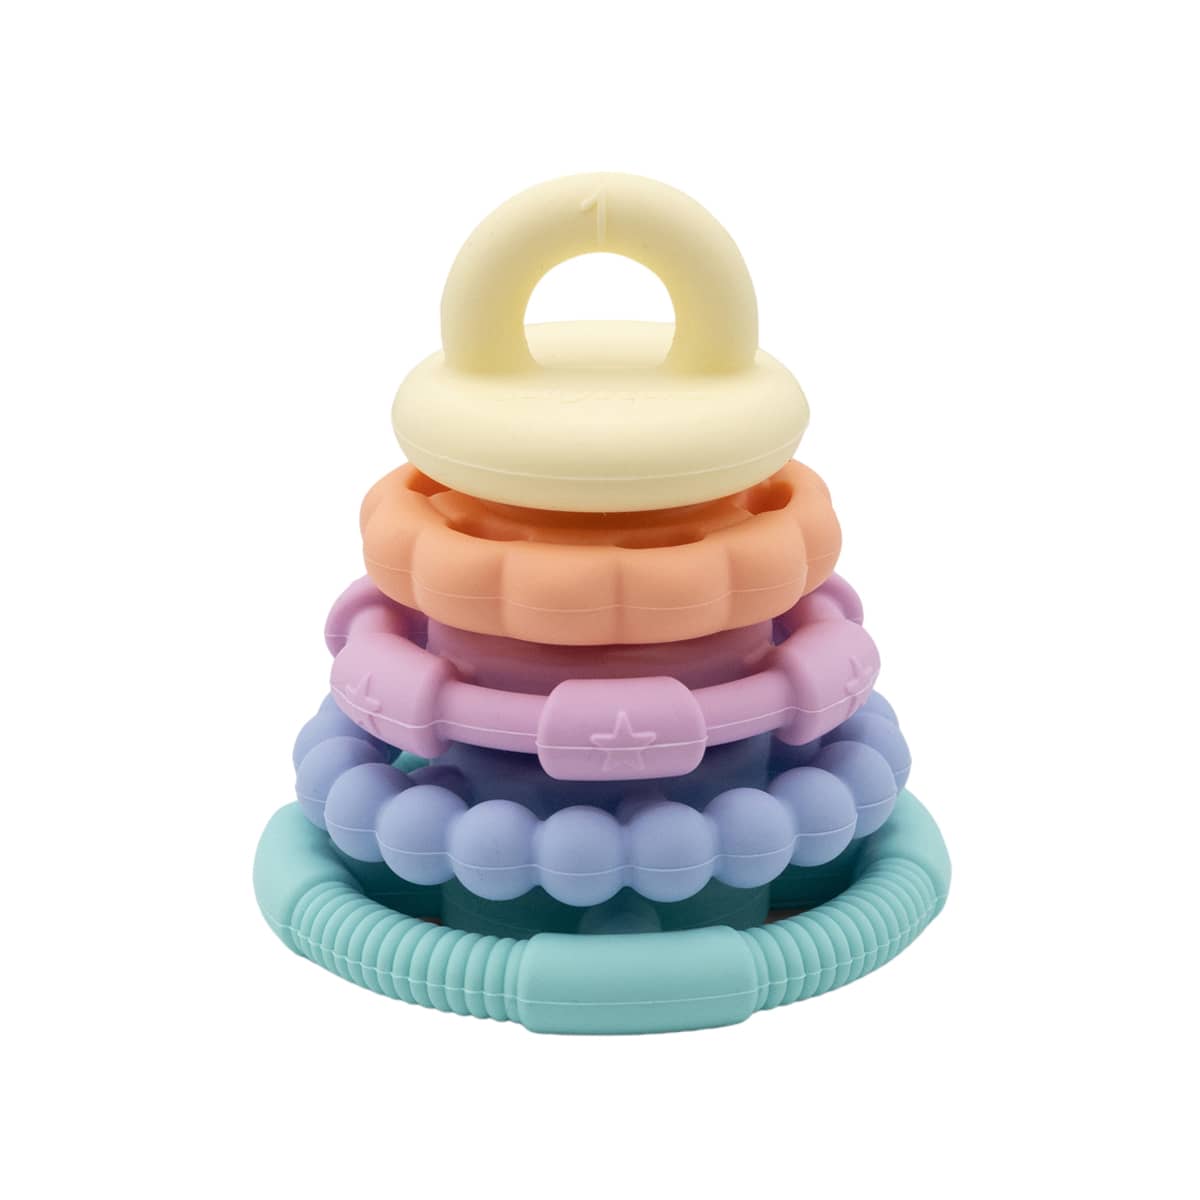 Jellystone Designs Rainbow Stacker Teether and Toy - Pastel